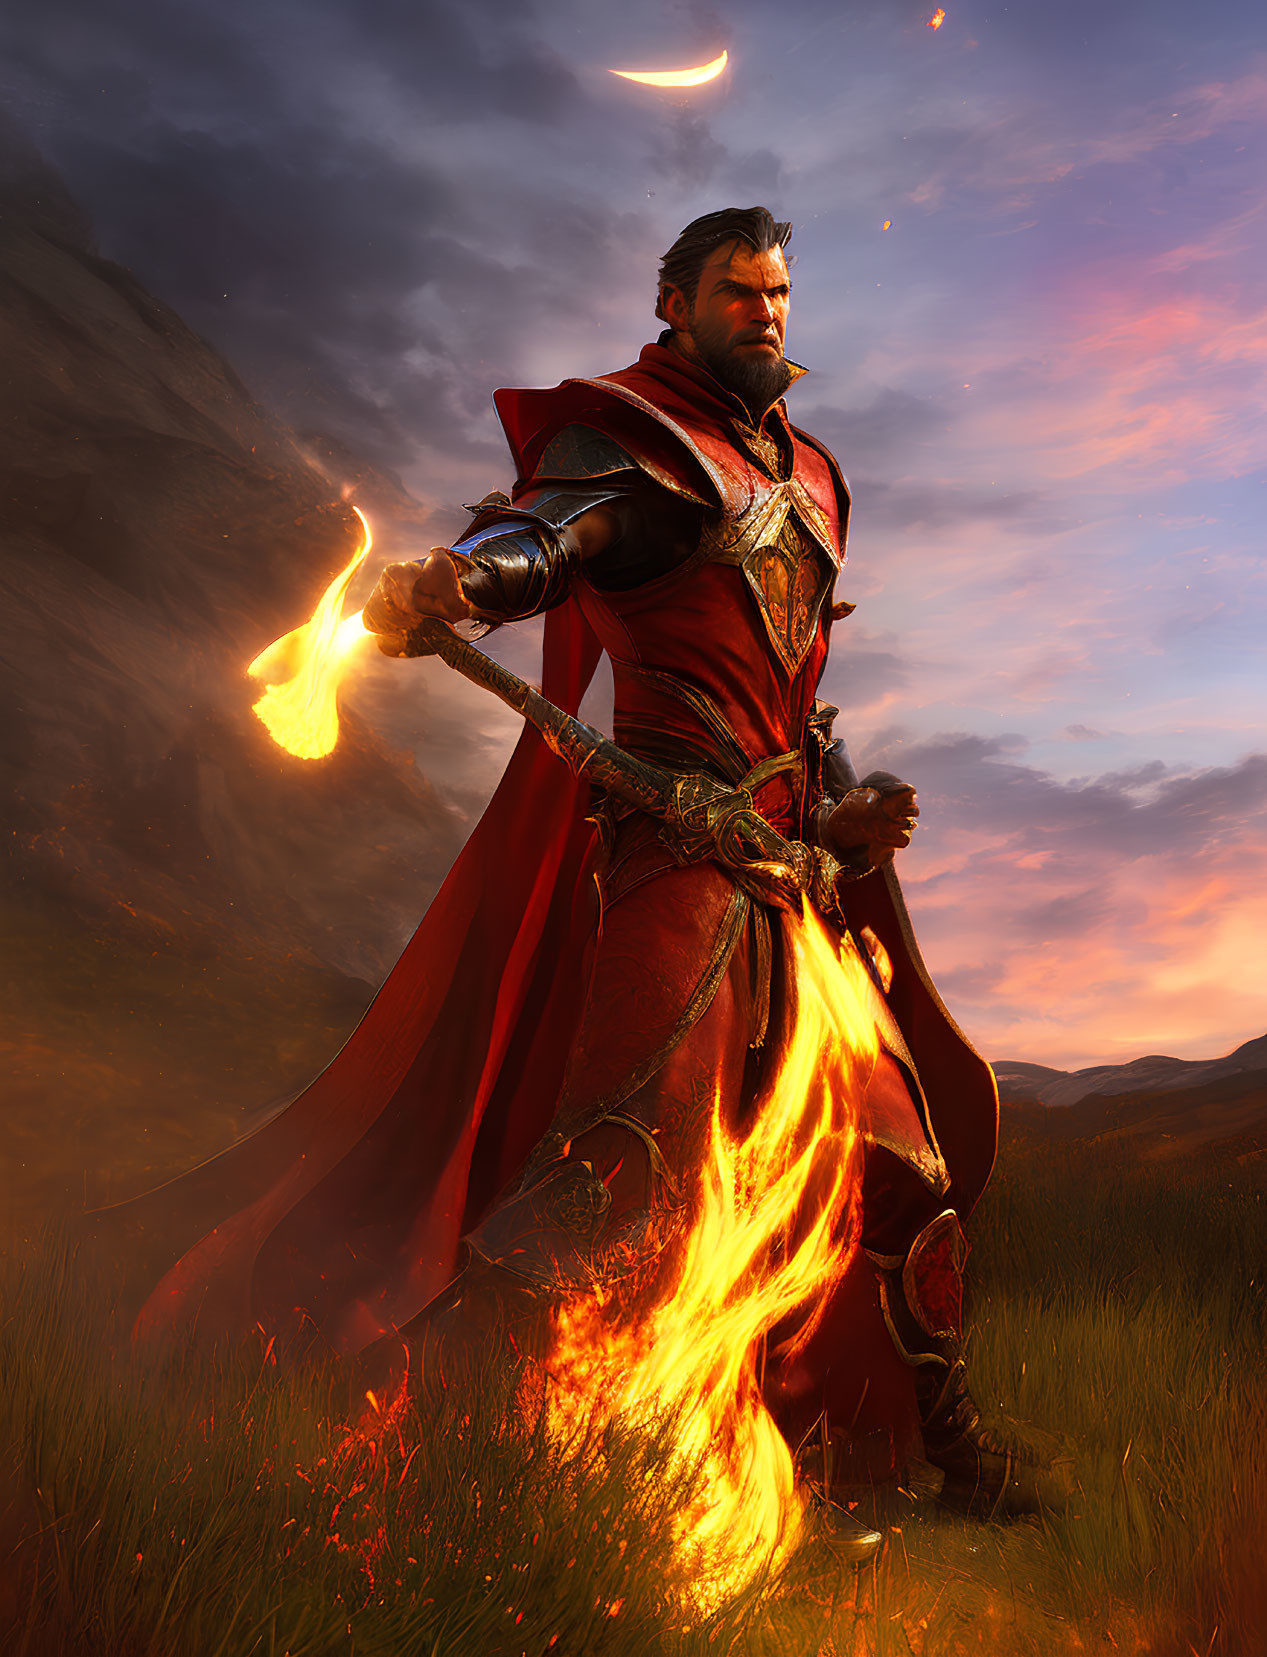 Regal figure in red cape and armor with flaming sword at dusk